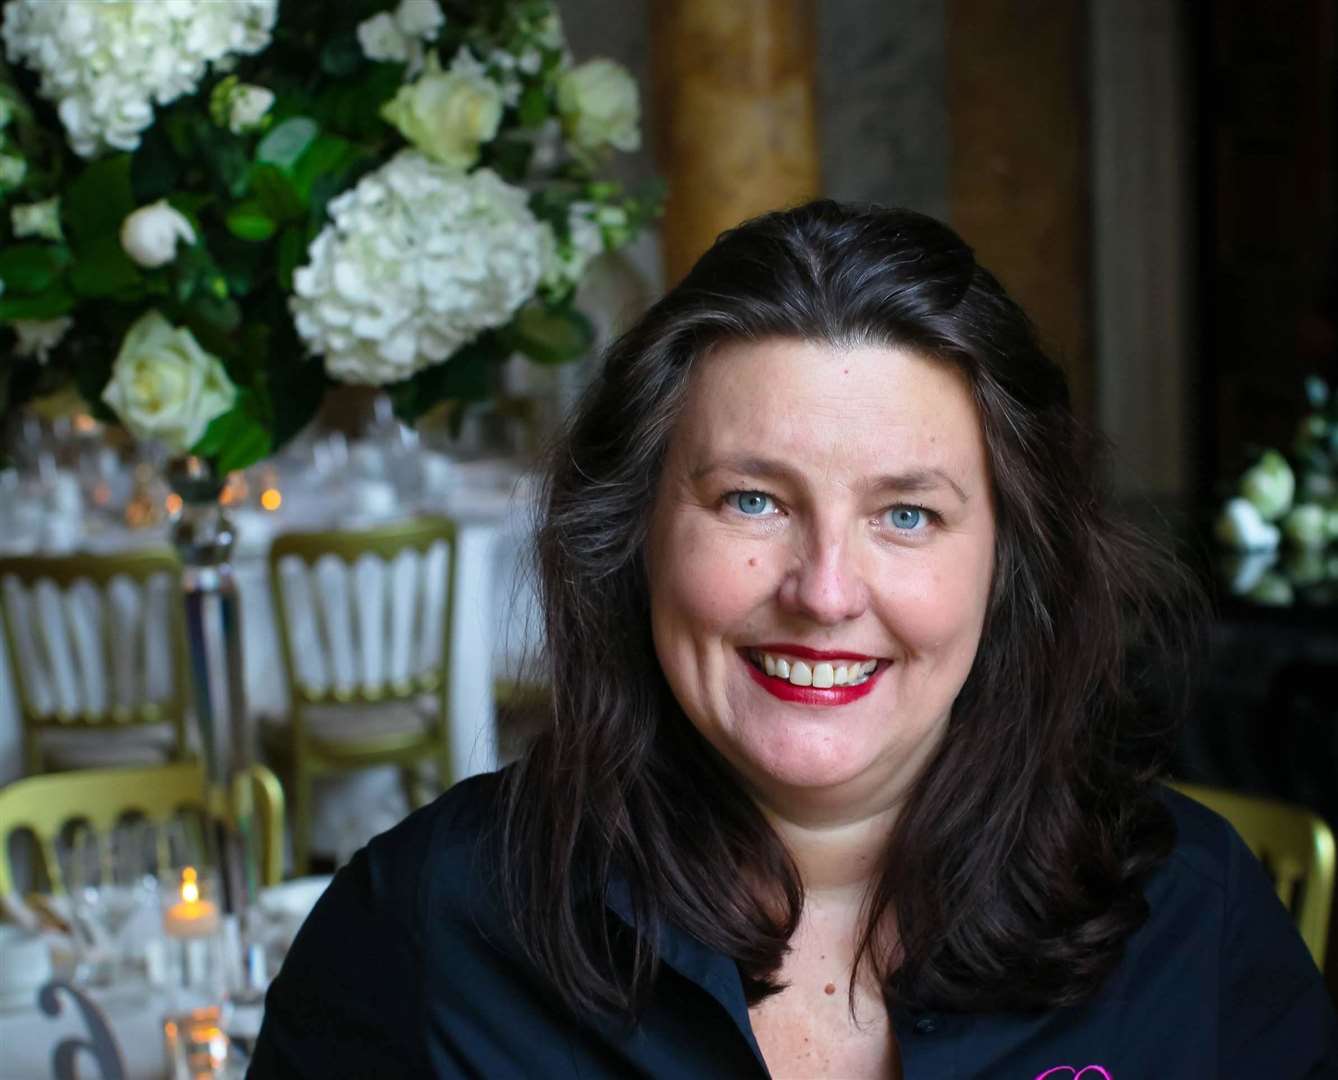 Chic Weddings and Events owner Laurie Edwards